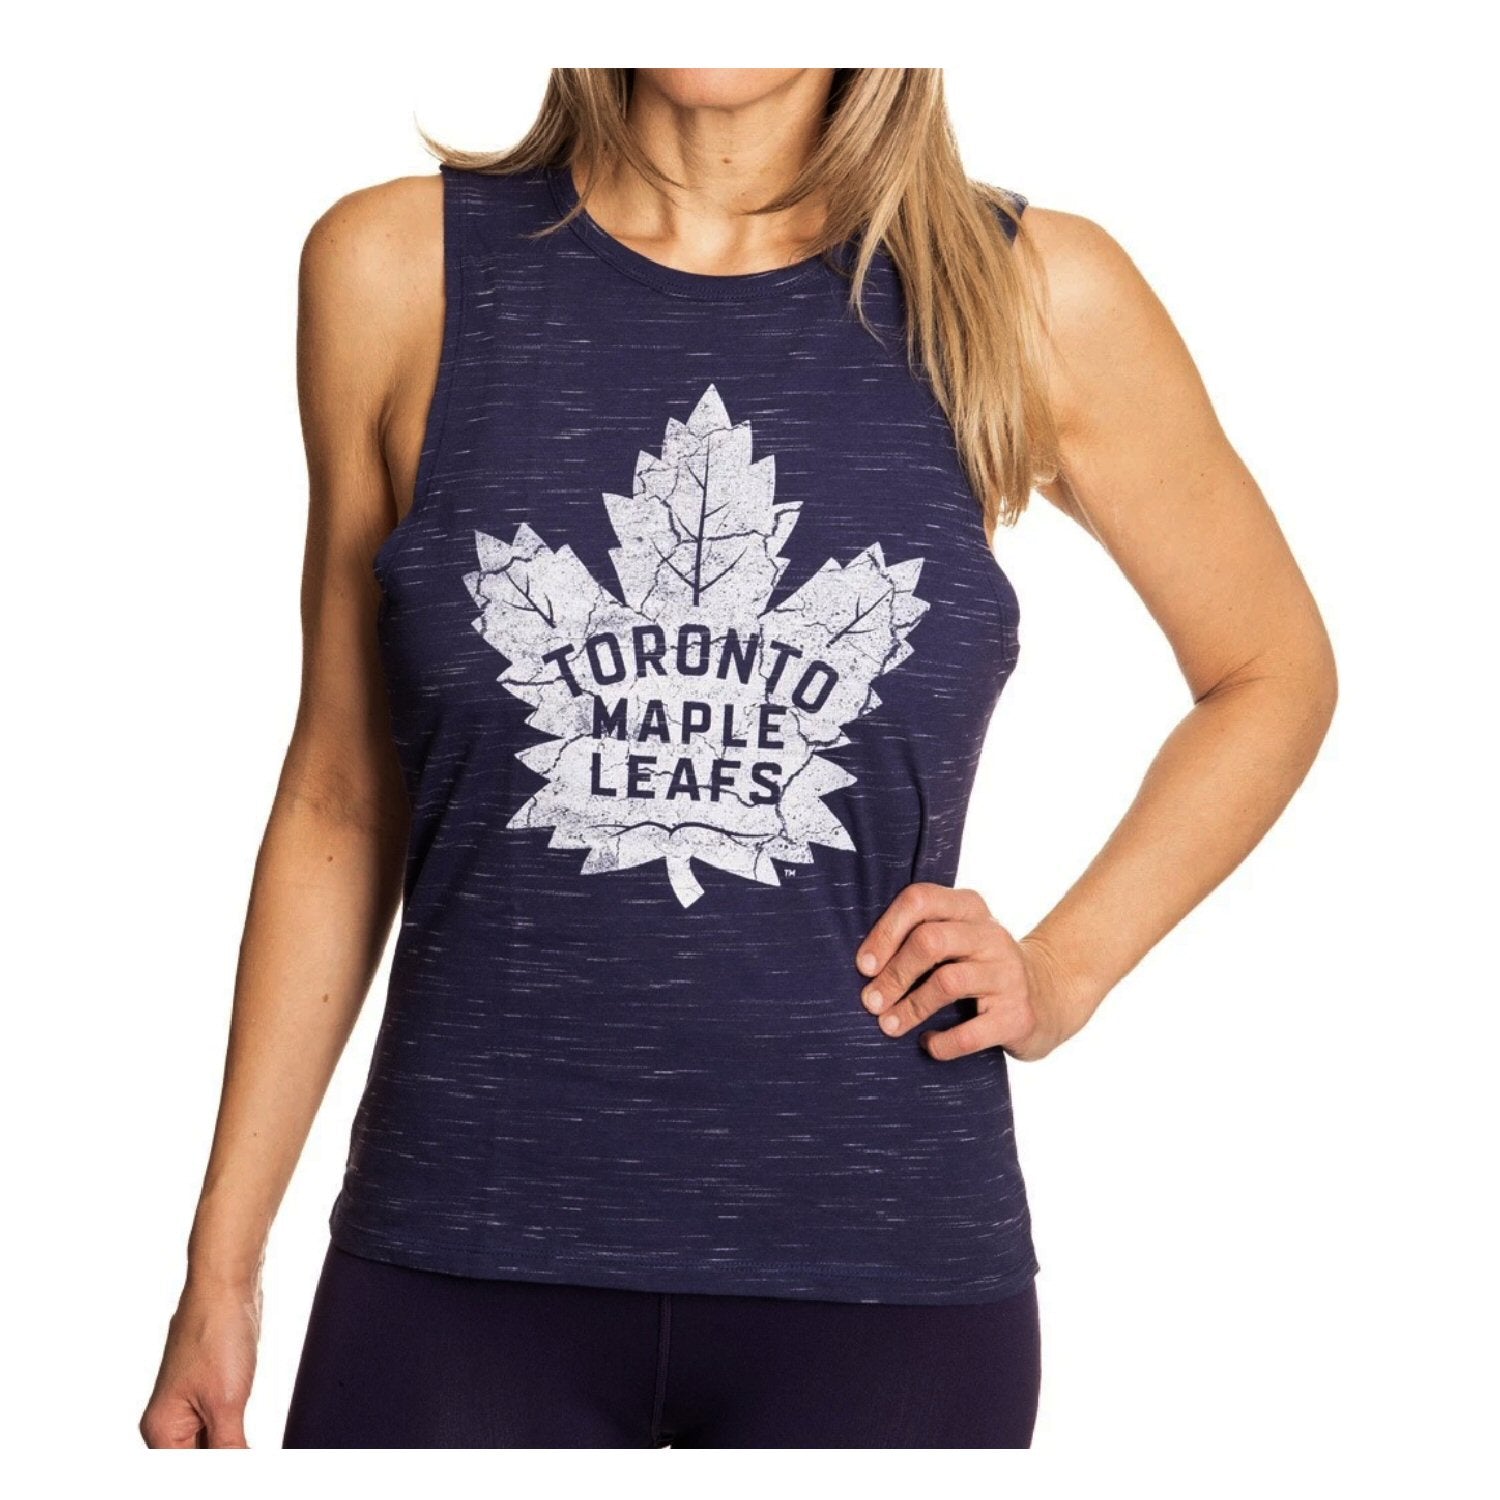 Officially Licensed NHL Women's Distressed Logo Tank Top - Toronto Maple Leafs